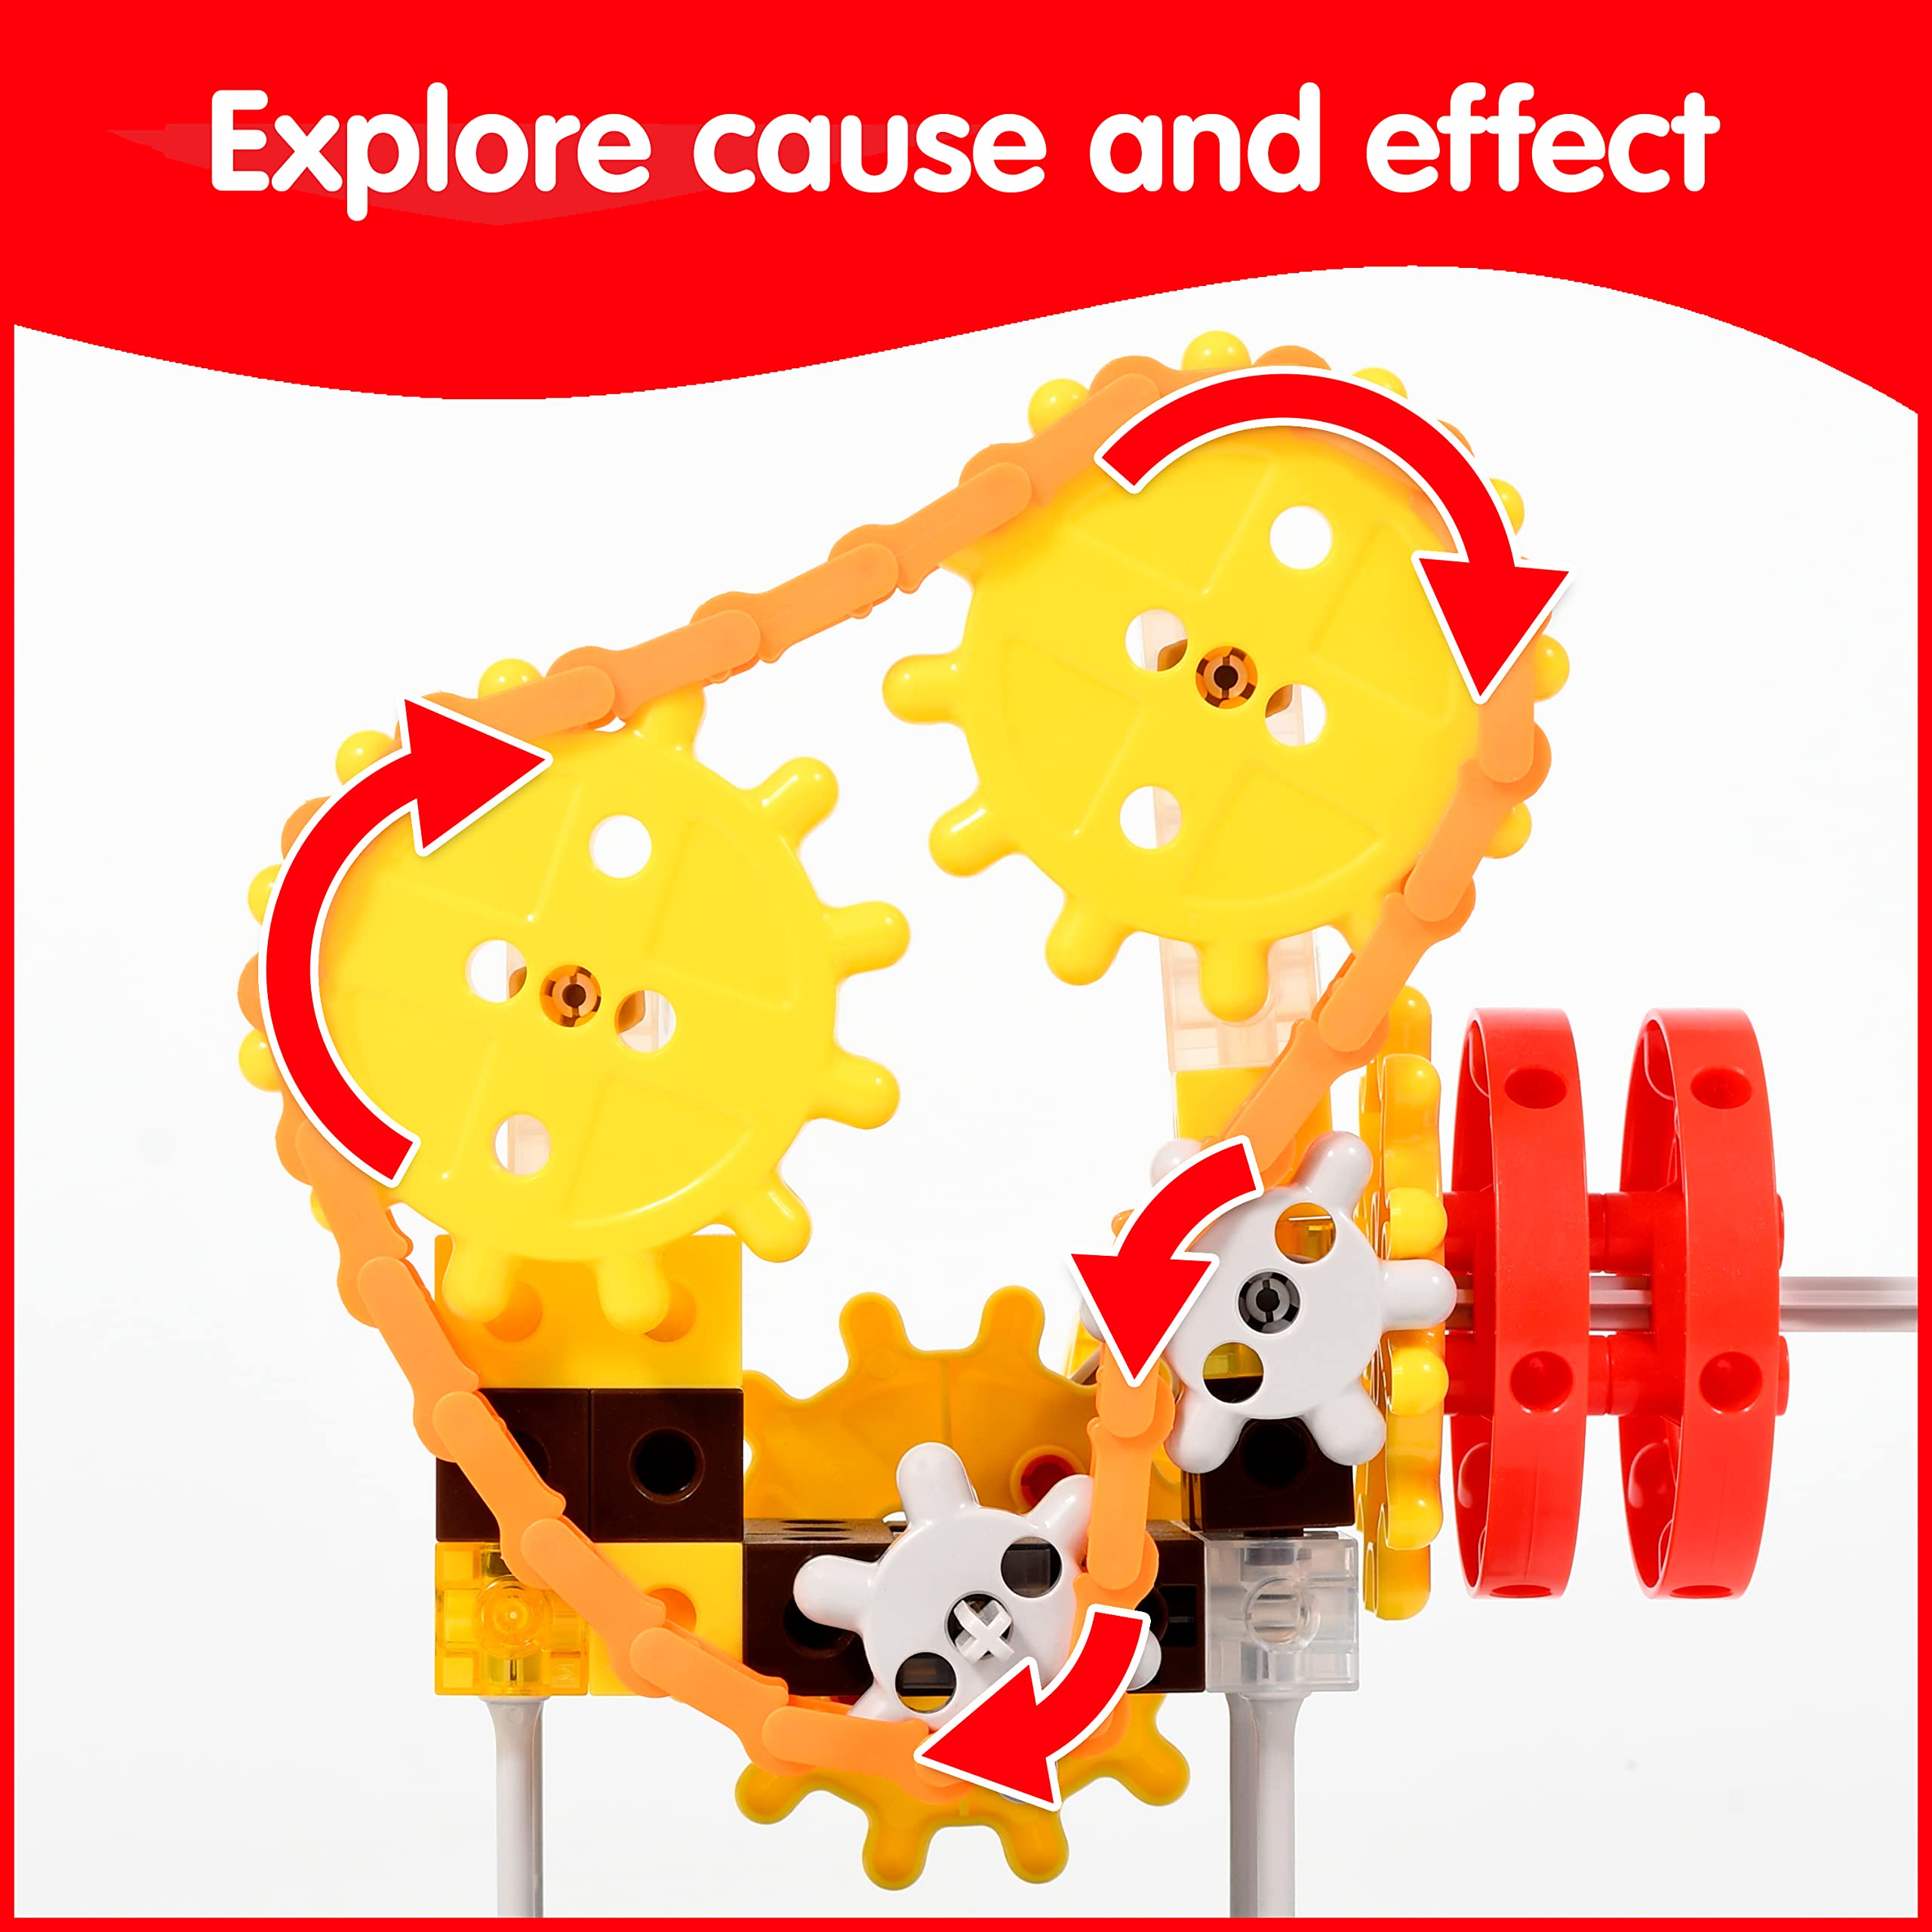 edxeducation My Gears Machine Set - 181 Pieces - 8+ Activities - Gears Toys for Kids - Build Rotating, Moving Models - Building Toys for Kids Ages 4-8